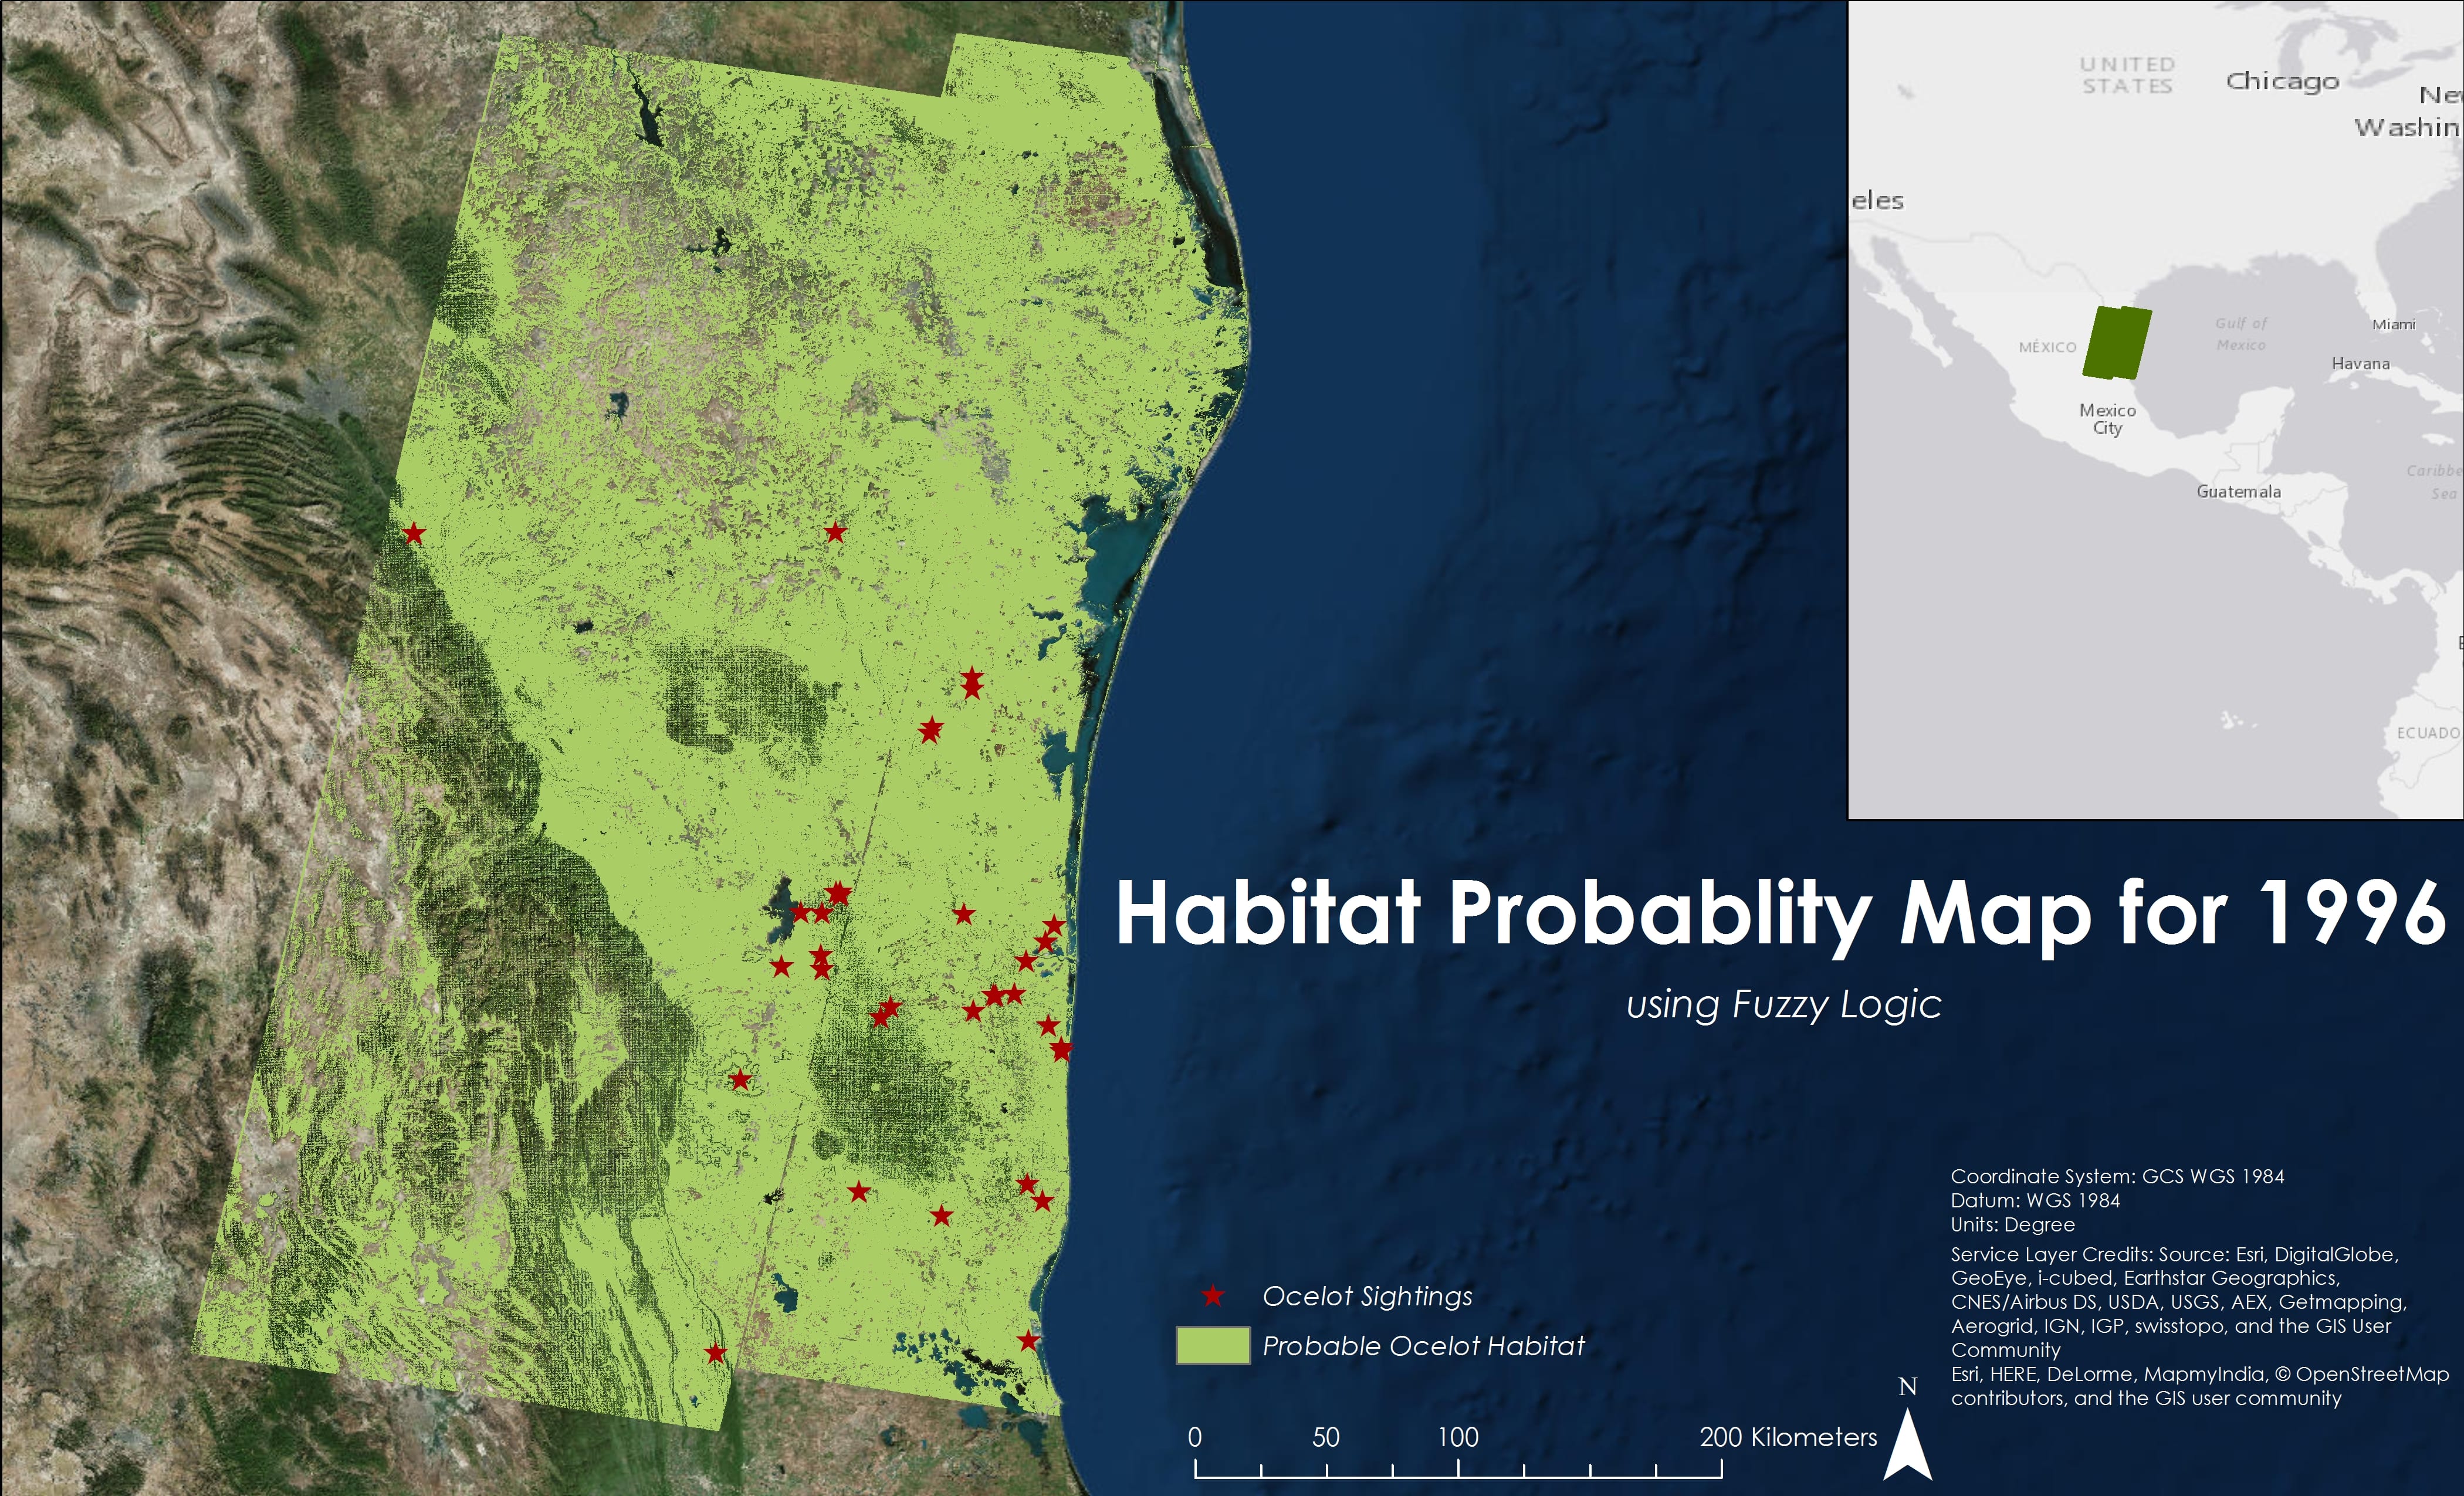 Habitat Probability Map created using Fuzzy Logic to show areas likely to be inhabited by ocelots. Image Credit: North Mexico Ecological Forecasting Team 